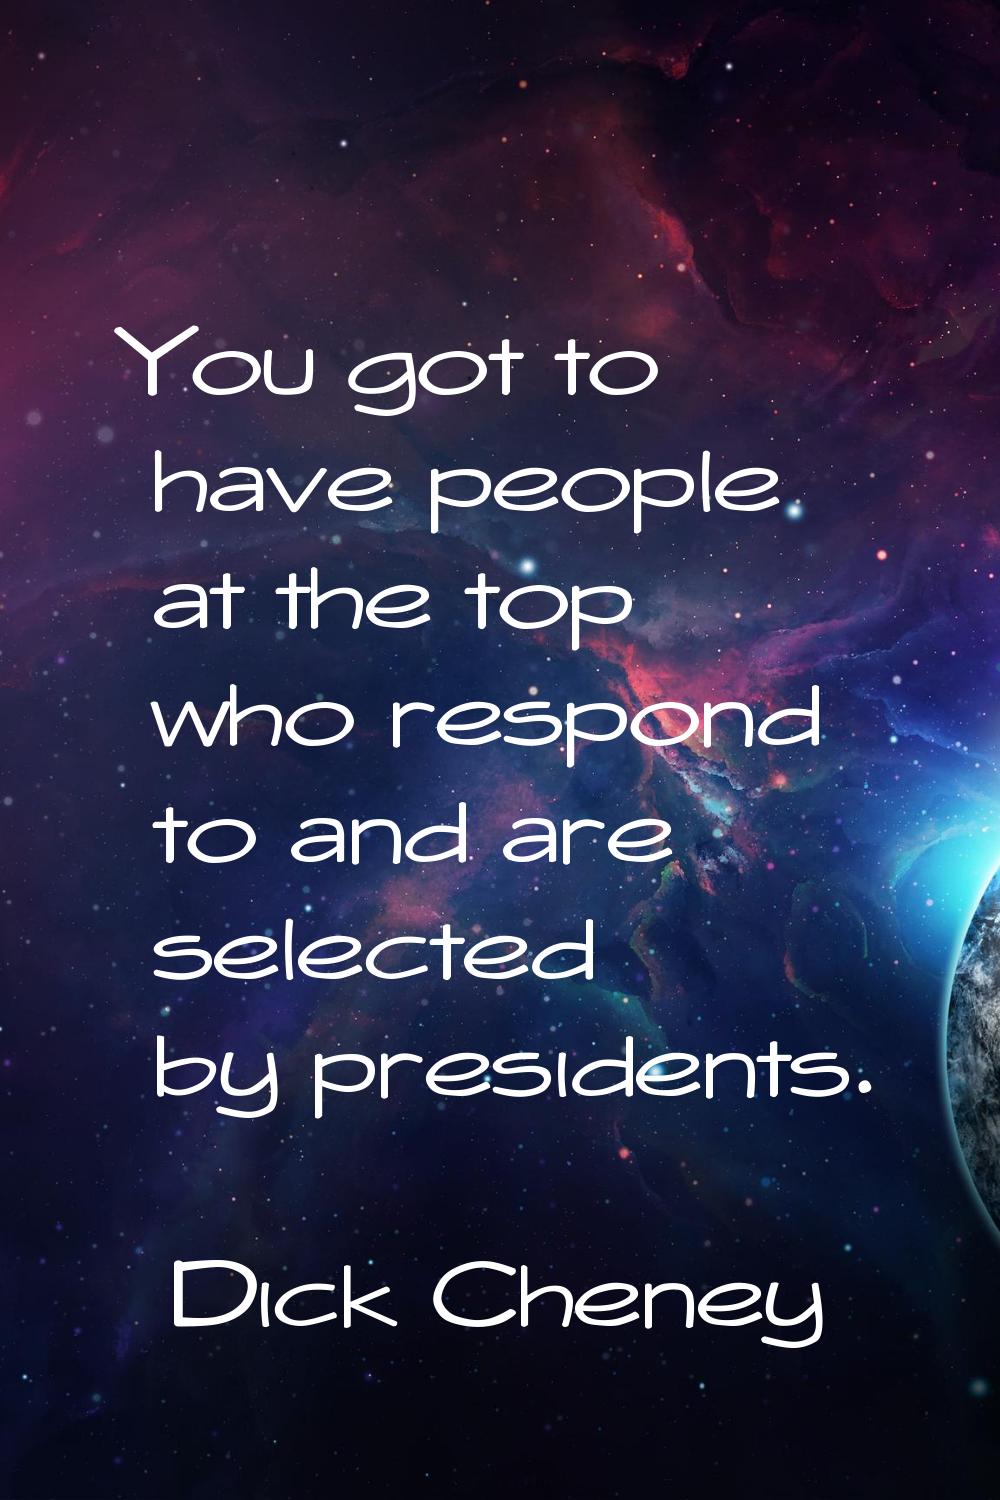 You got to have people at the top who respond to and are selected by presidents.